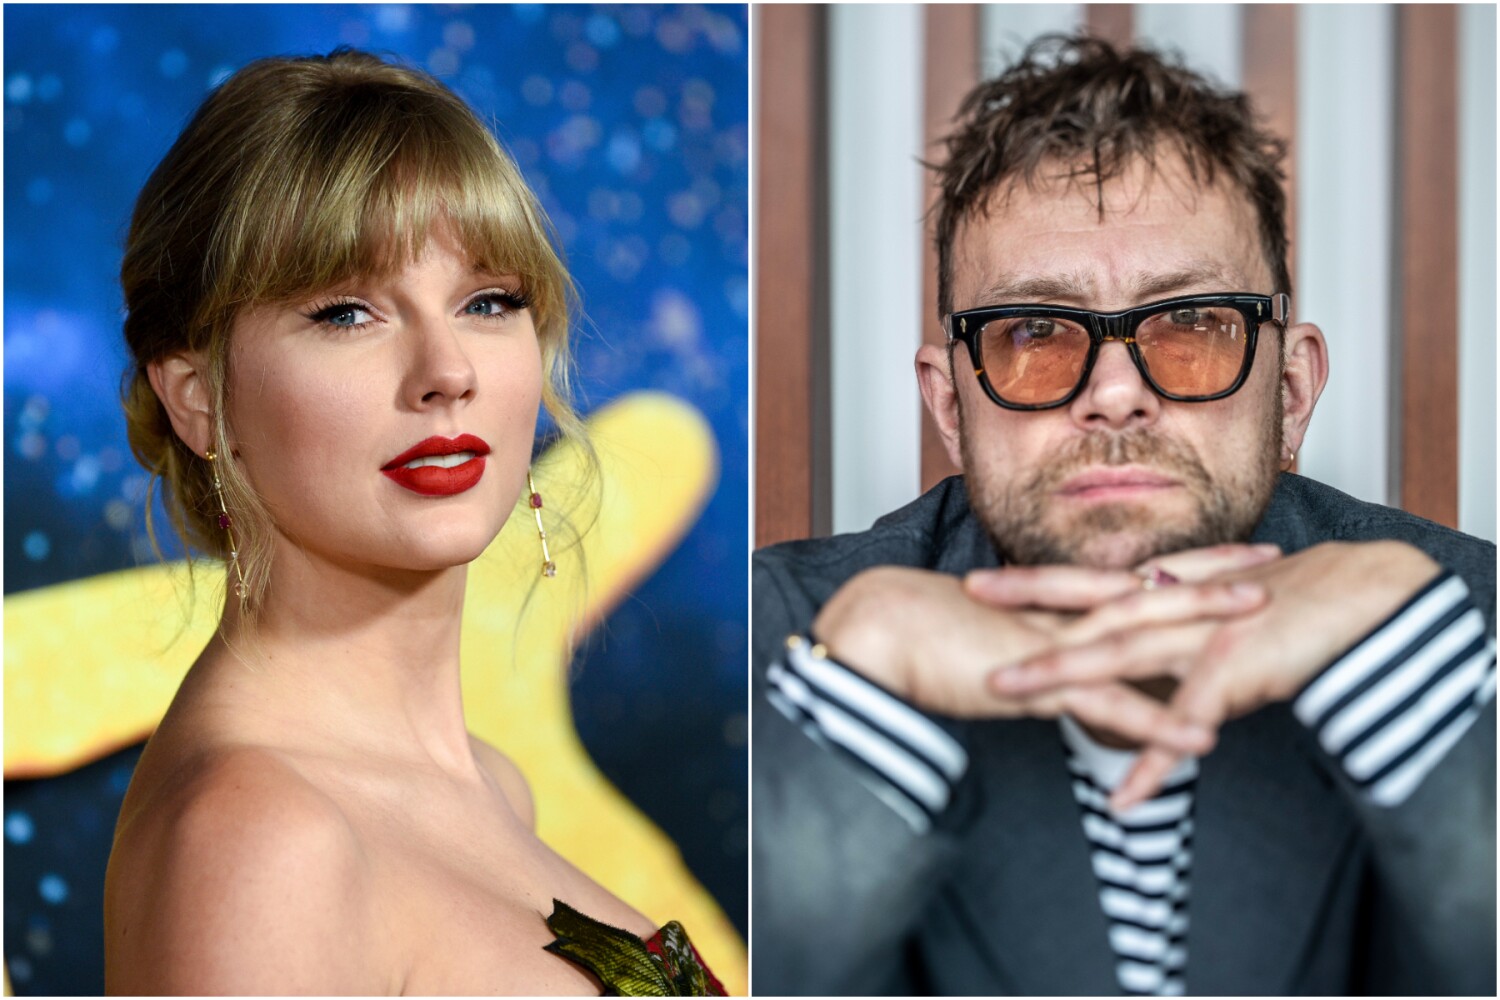 Podcast: The Blur guy insulted a pop star. The reaction? Swift